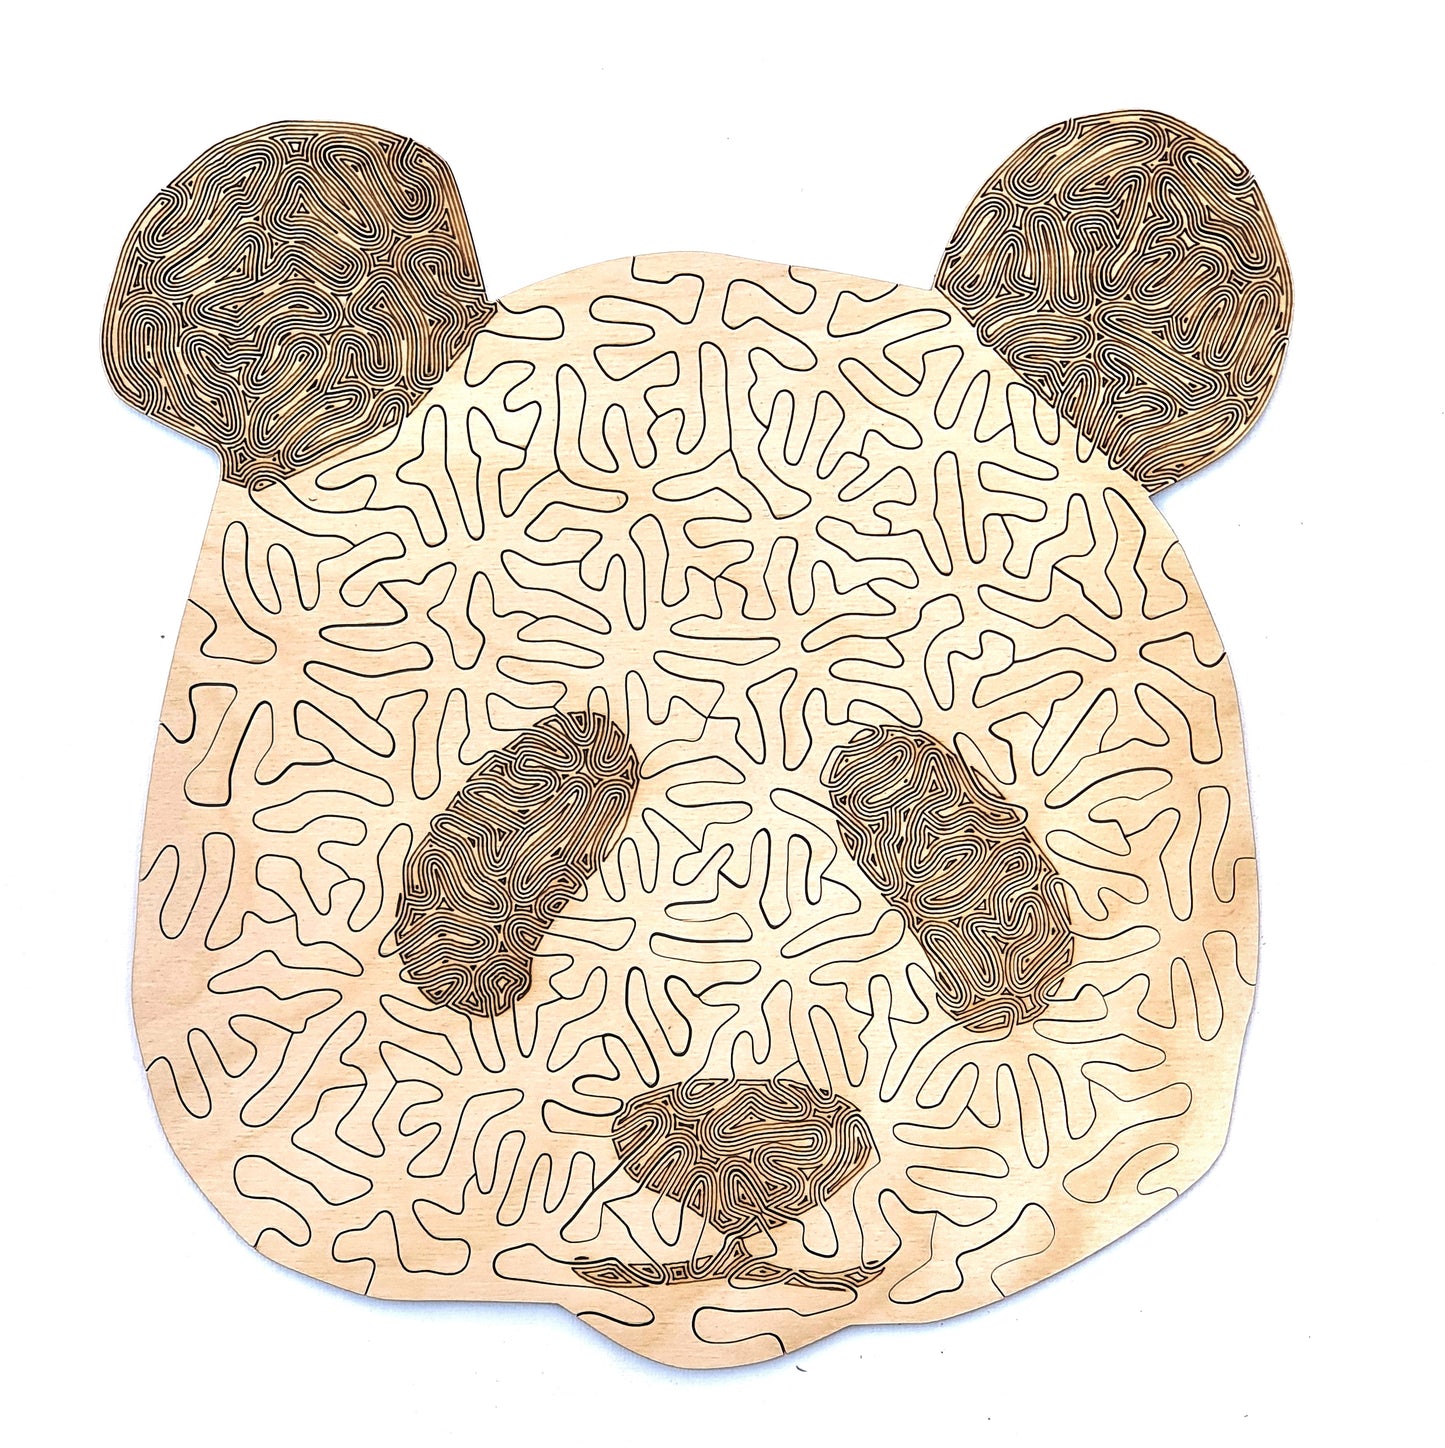 Giant Panda Wooden Puzzle | Chaos series | 50 pieces